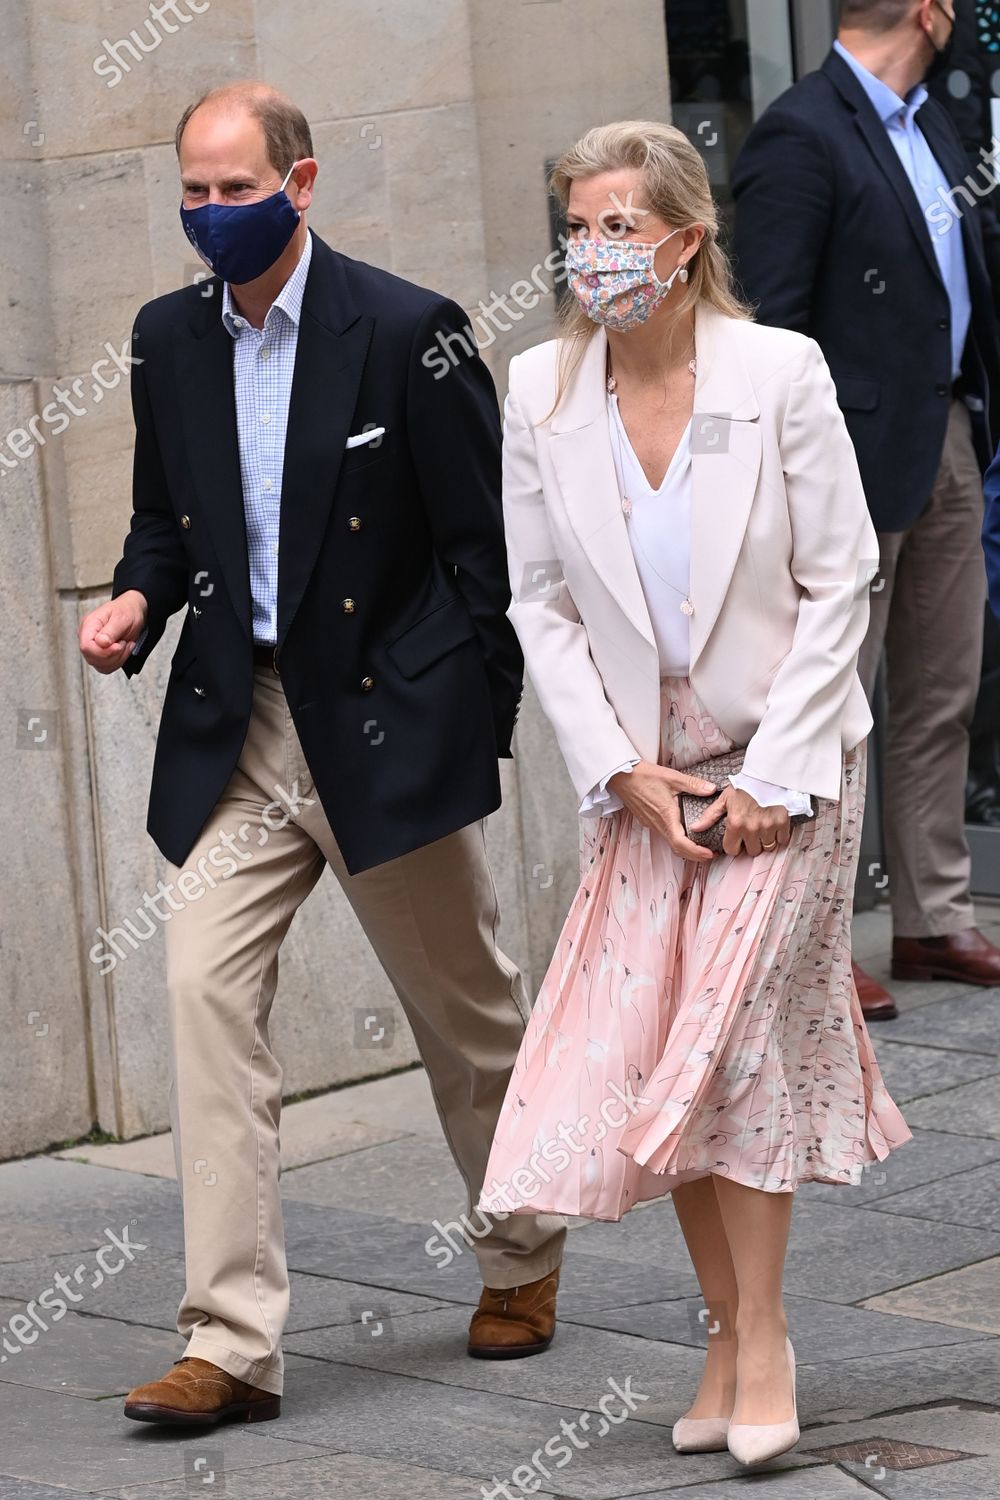 prince-edward-and-sophie-countess-of-wessex-visit-to-edinburgh-scotland-uk-shutterstock-editorial-12173651r.jpg